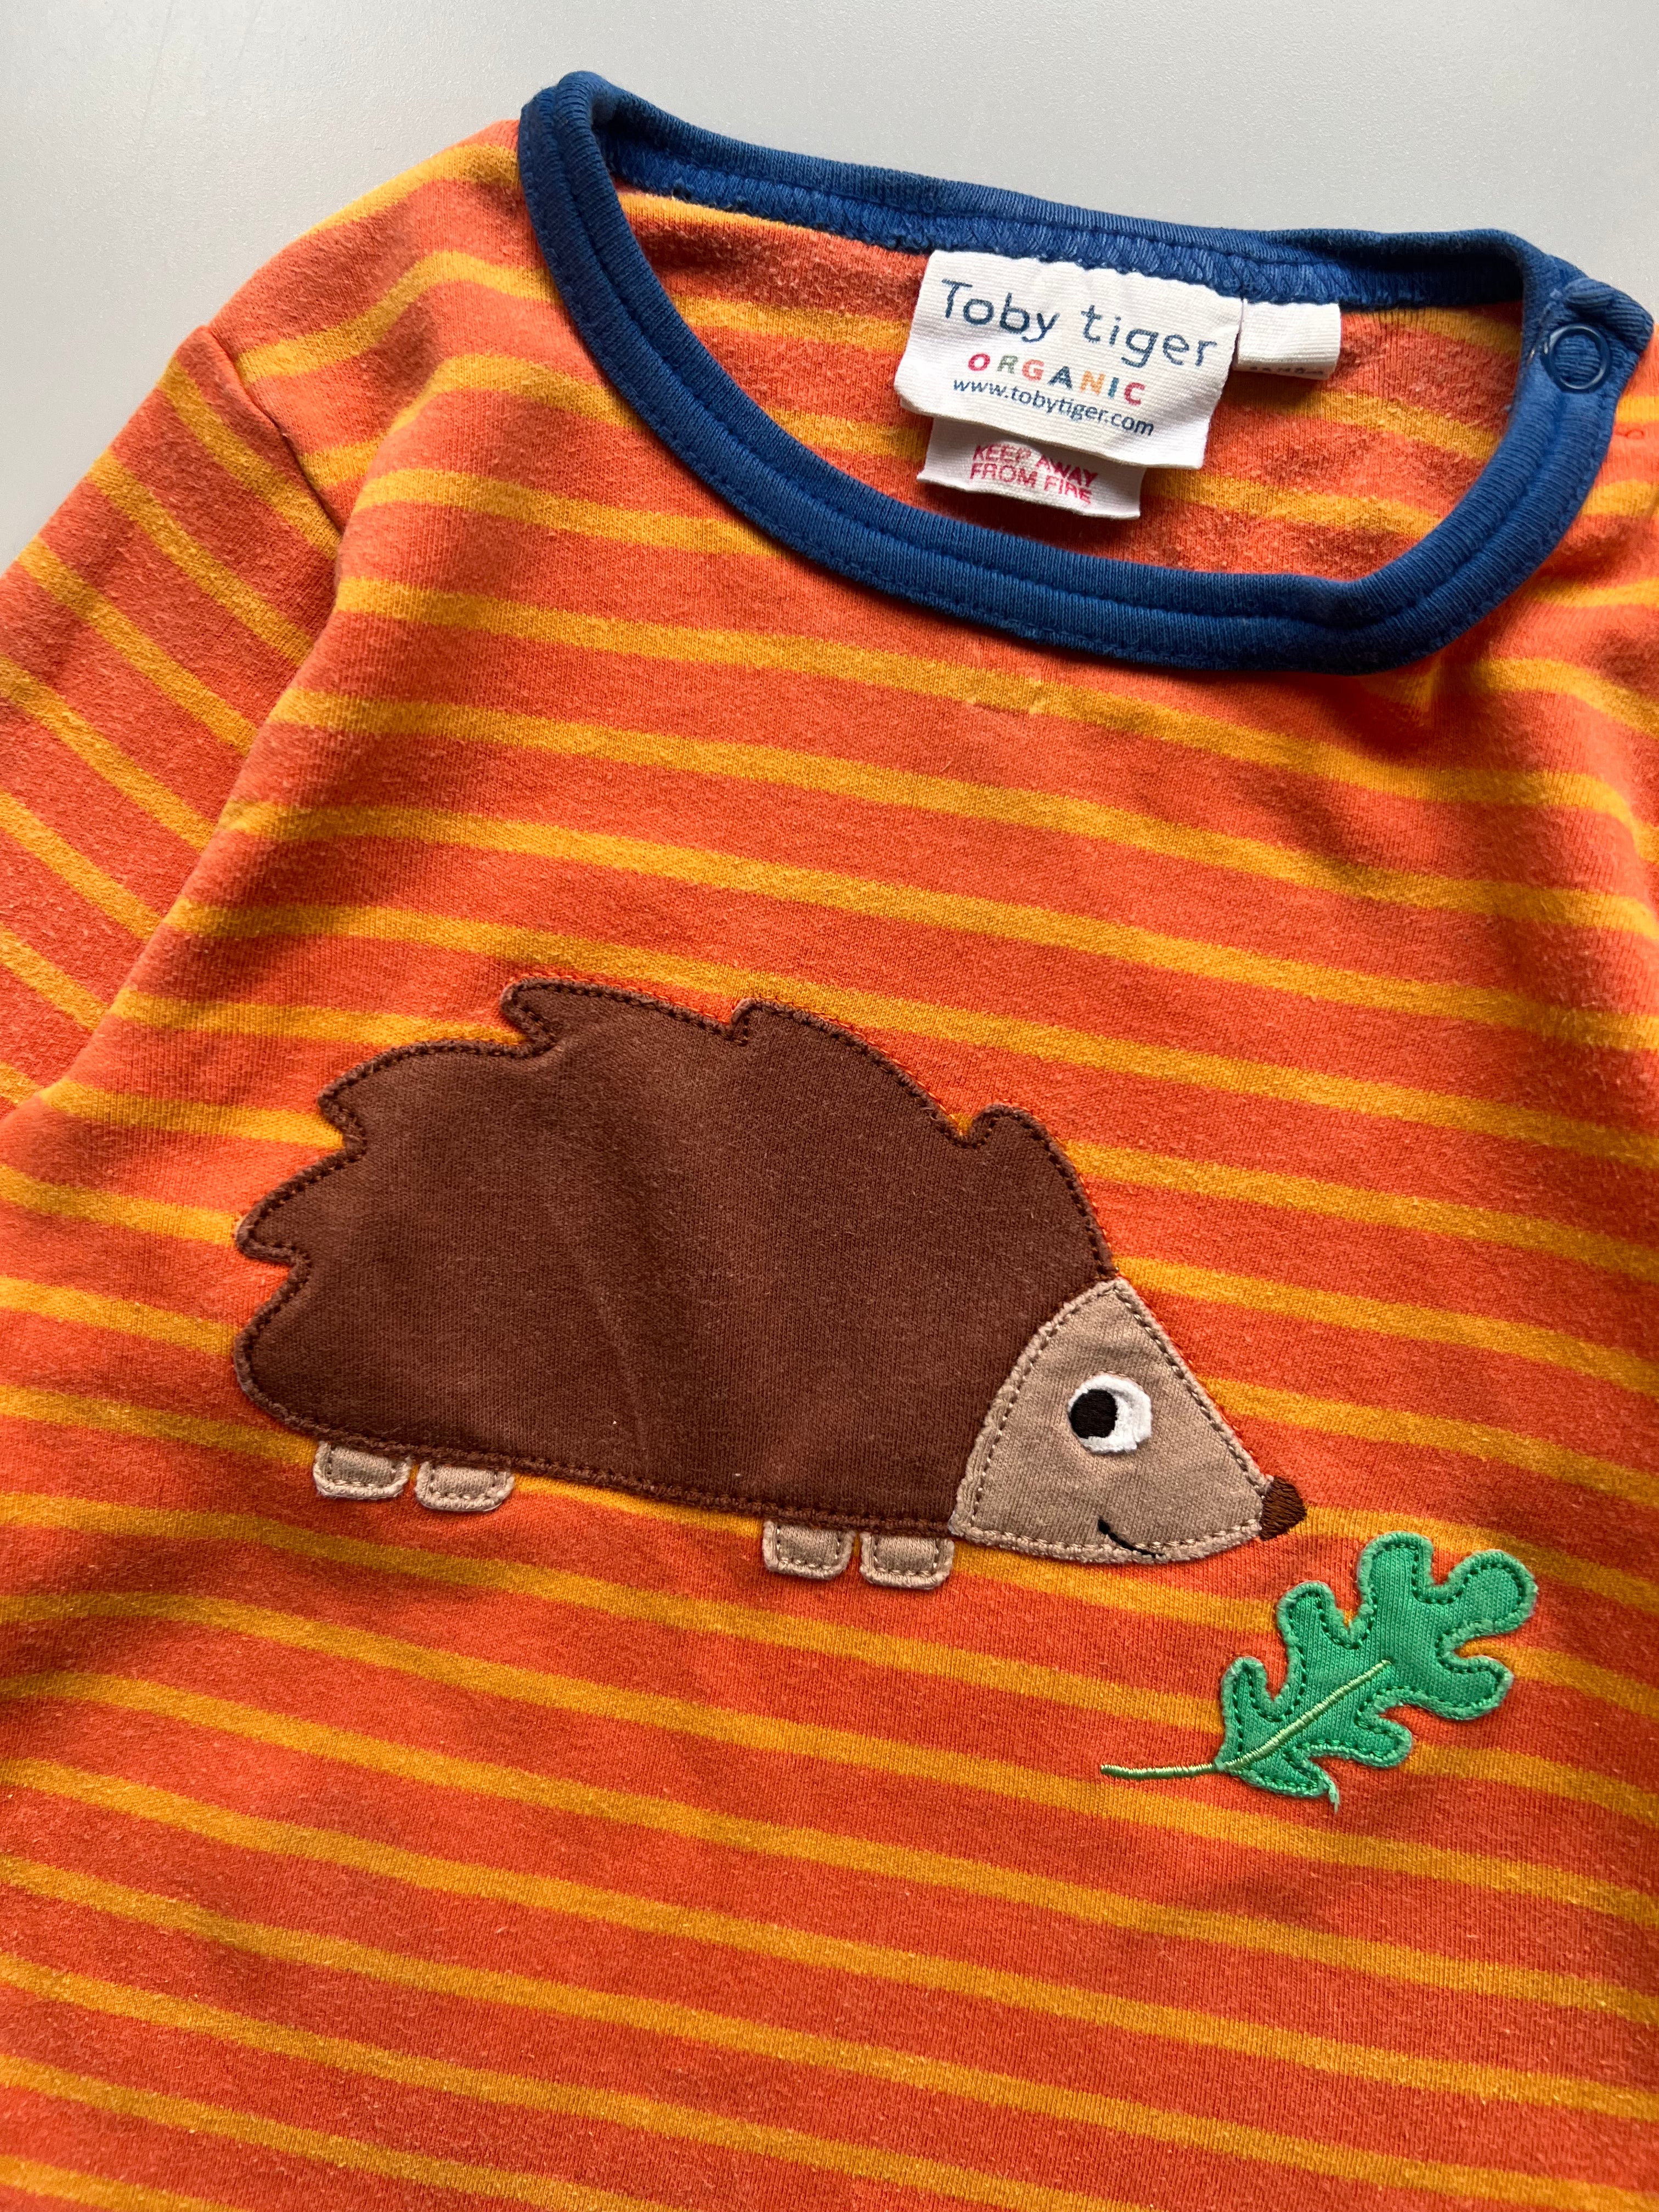 Toby Tiger Organic Cotton Hedgehog Tee 12-18 Months